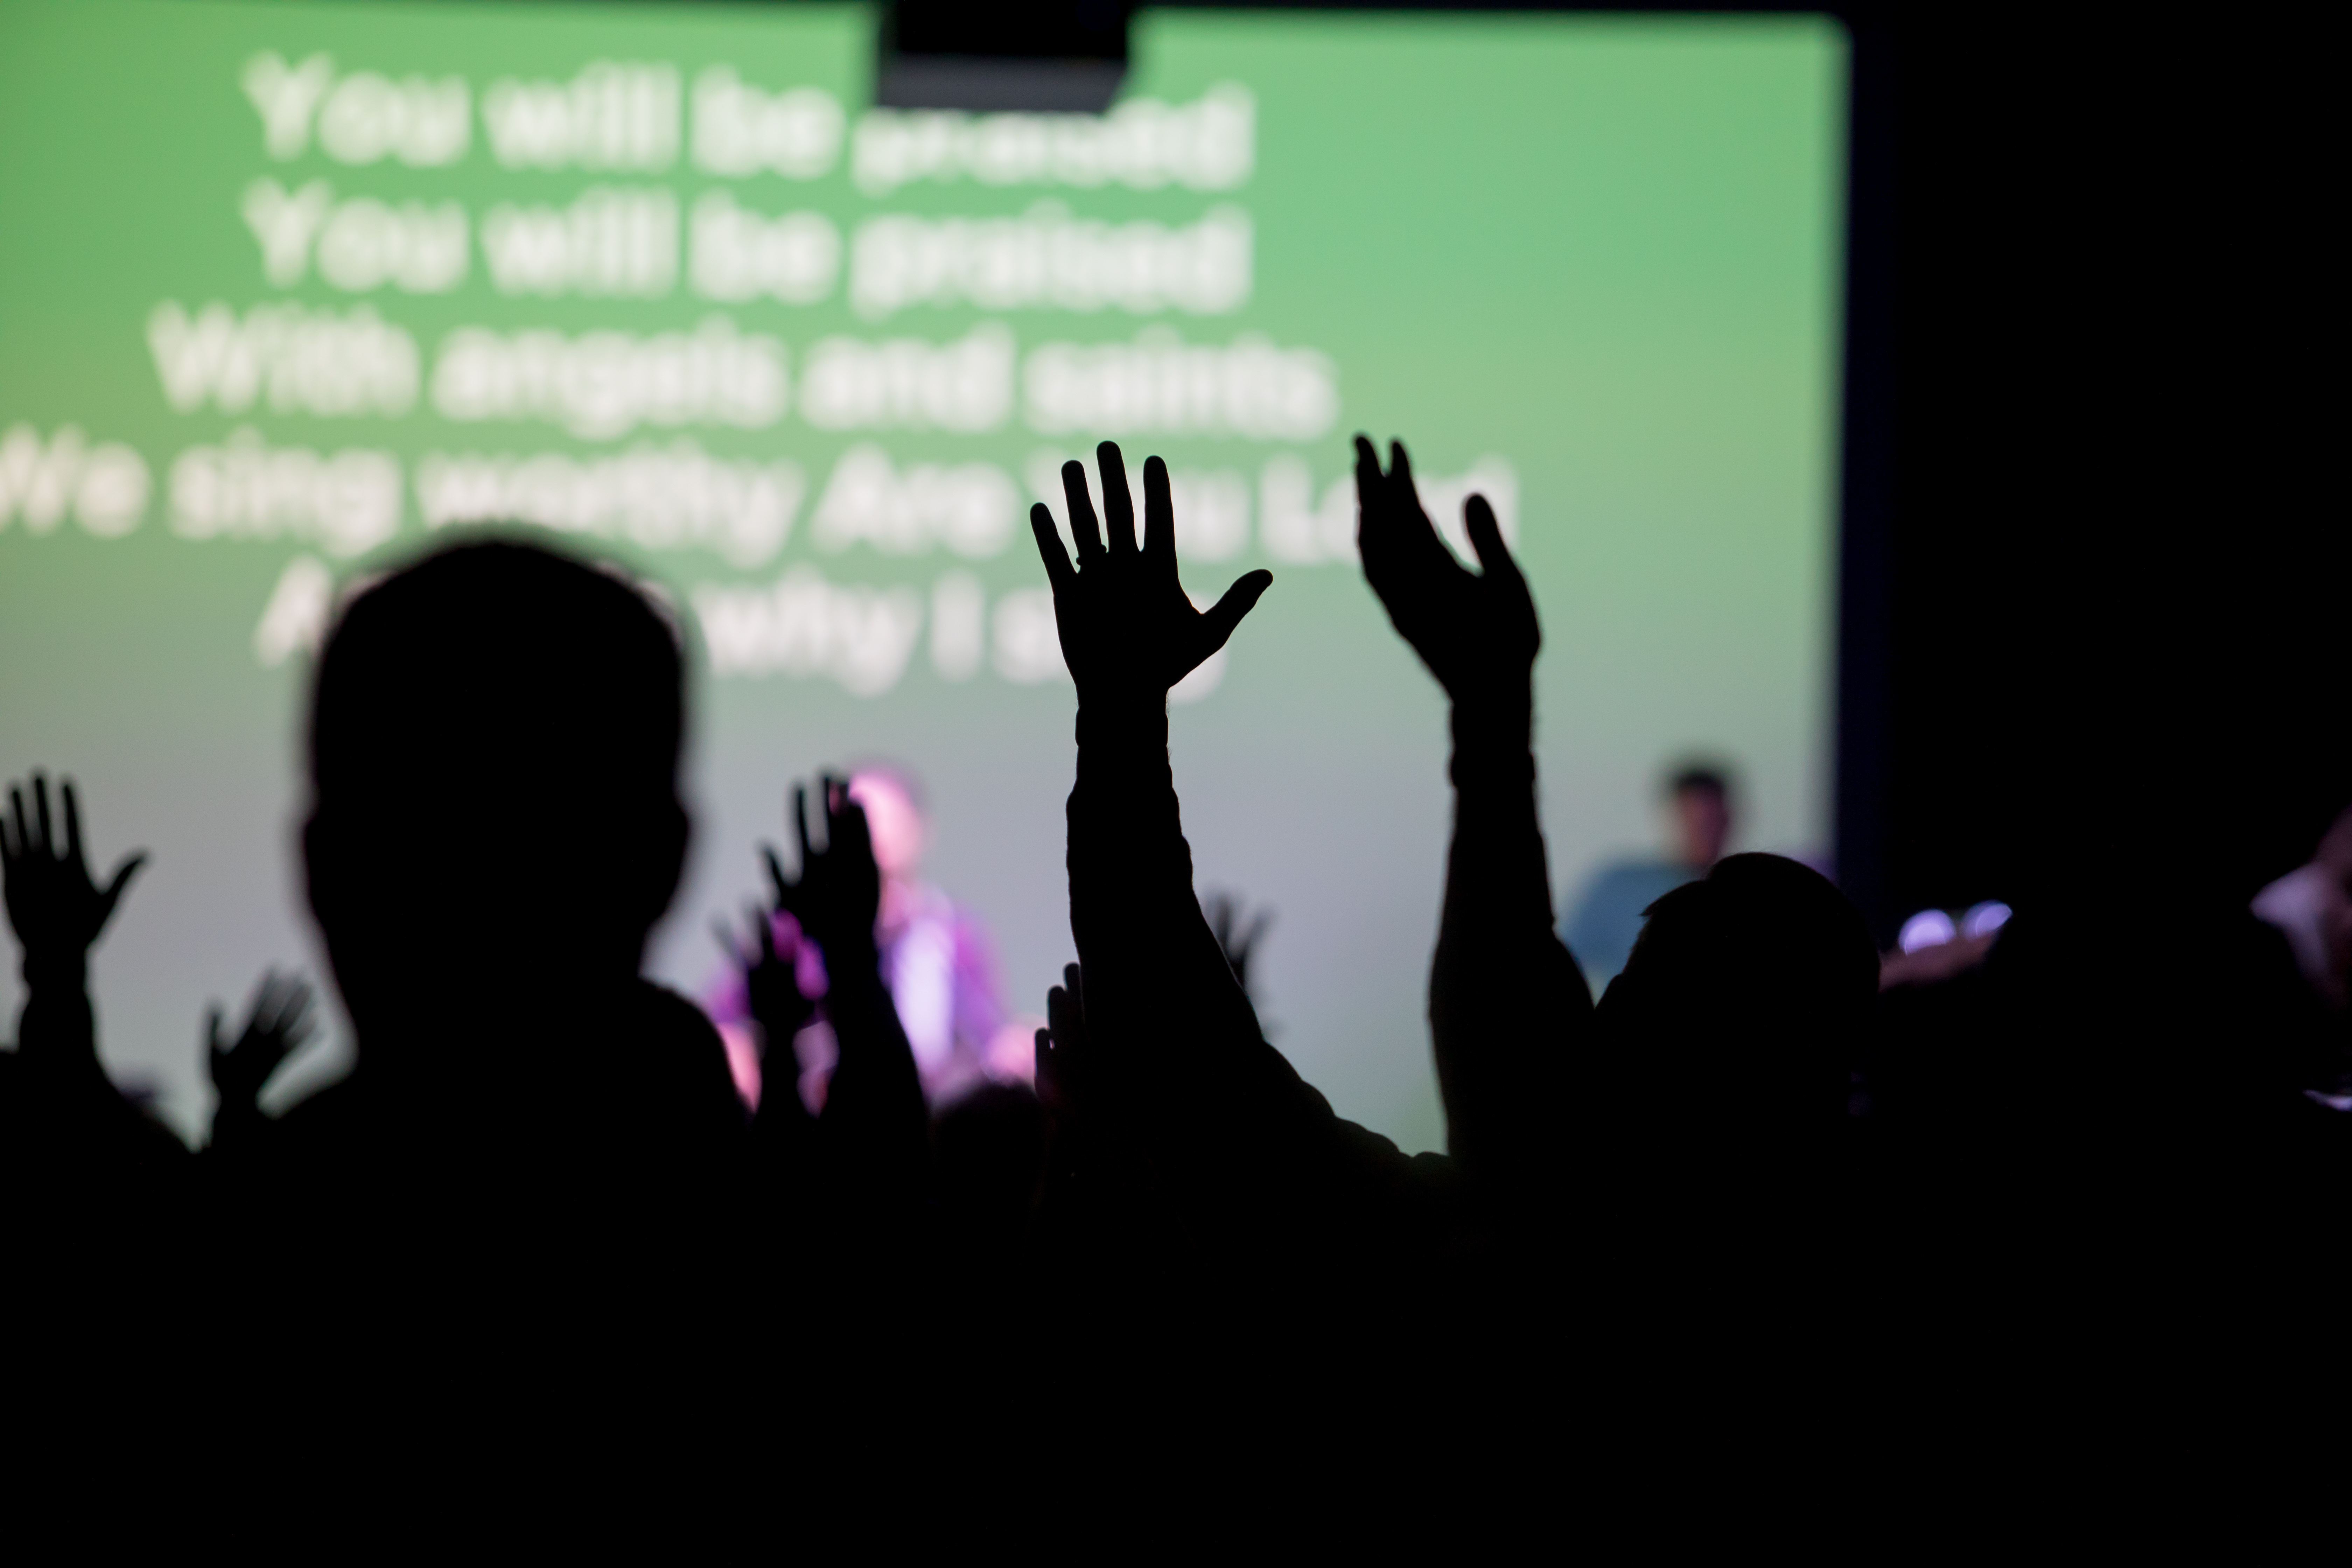 Christians raising their hands at a church worshipping Jesus during their religious service gathering.